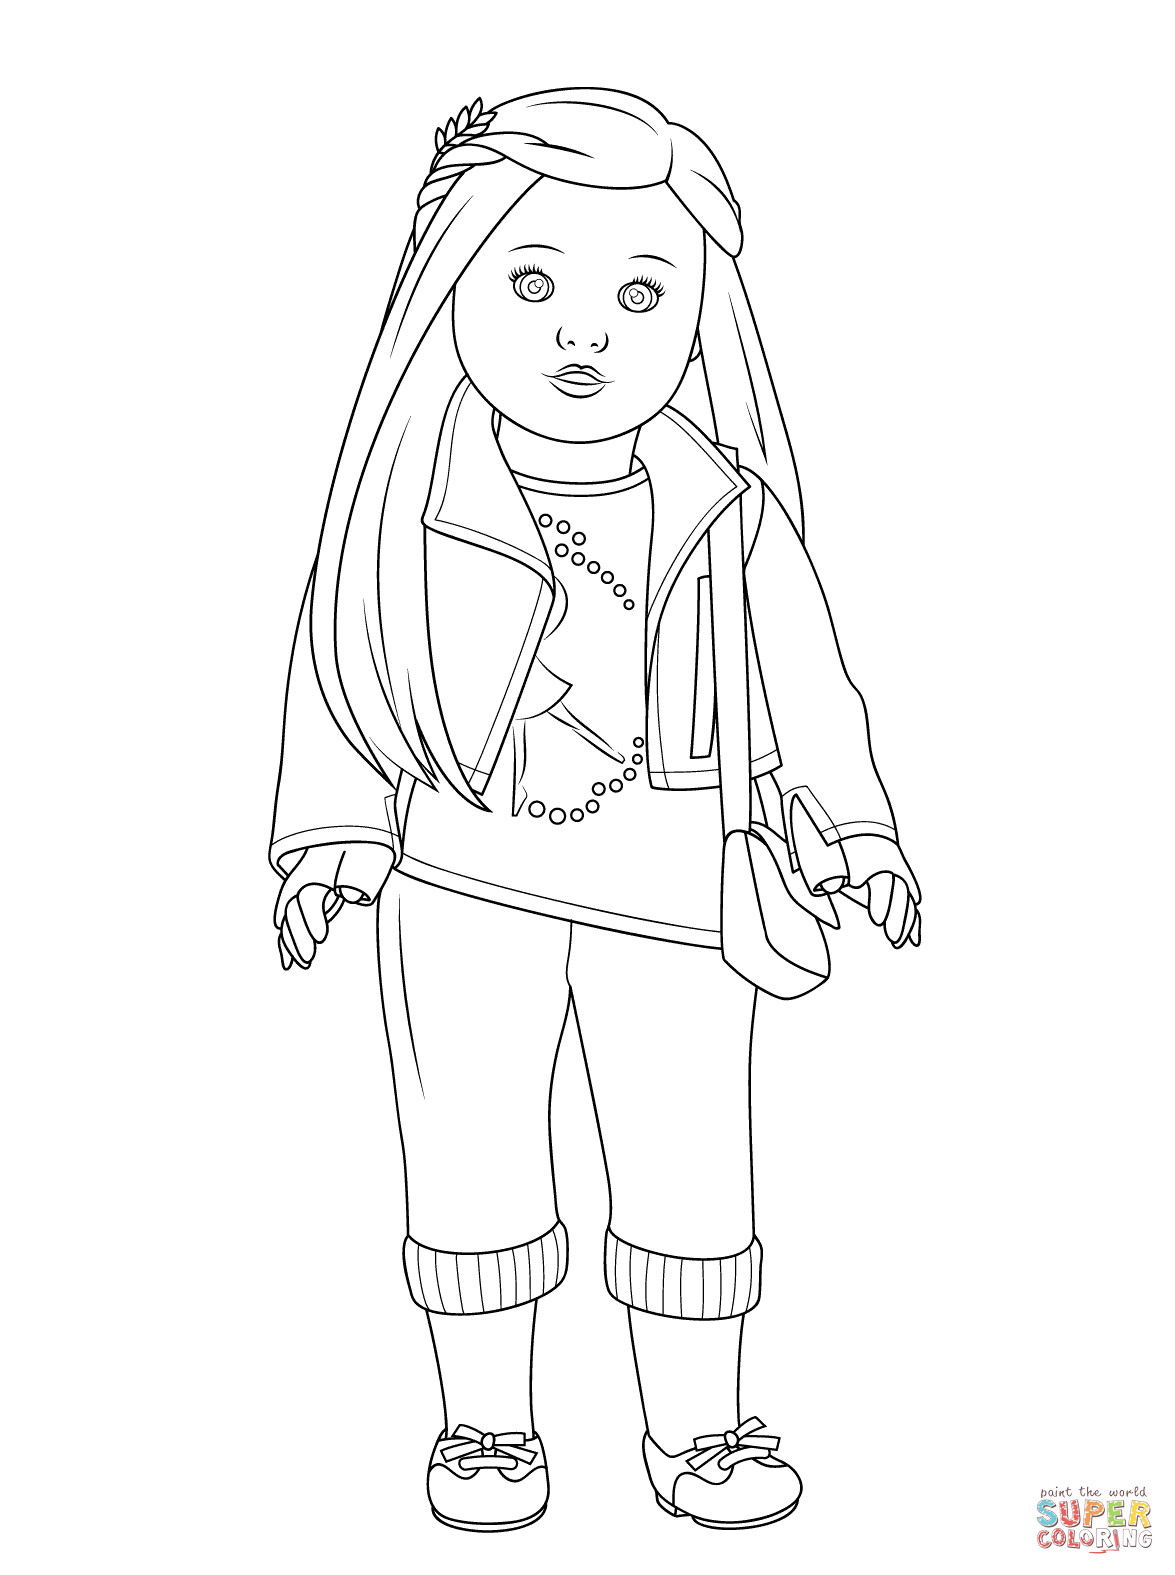 American Girl Coloring Pages To Print
 American Girl Isabelle Doll coloring page